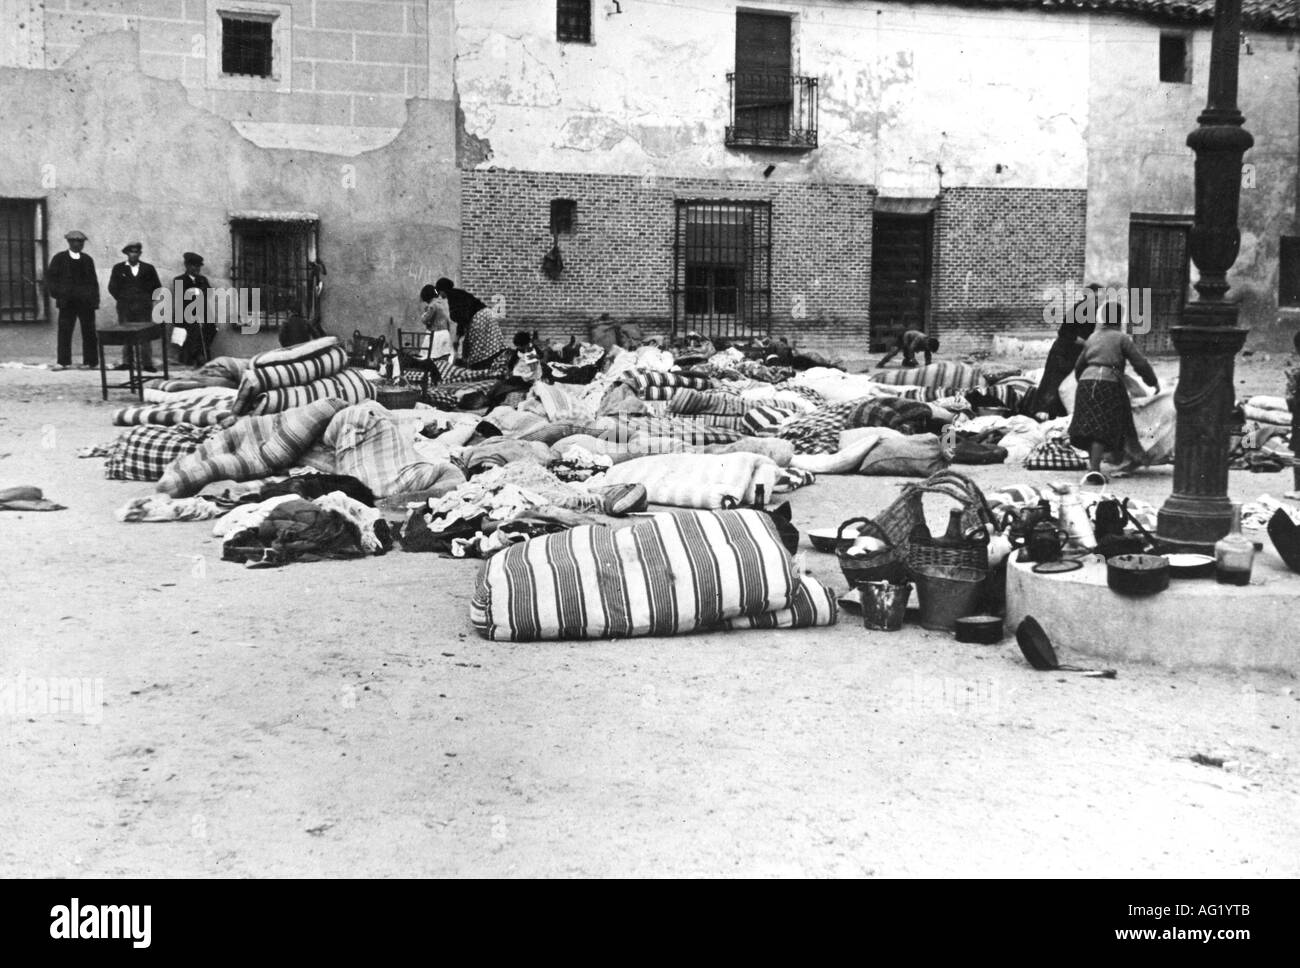 geography / travel, Spain, Spanish Civil War 1936 - 1939, Madrid, 1.11.1936, inhabitants preparing for the flight, 20th century, Spanish, historic, historical, refugees, escape, misery, distress, people, 1930s, Stock Photo